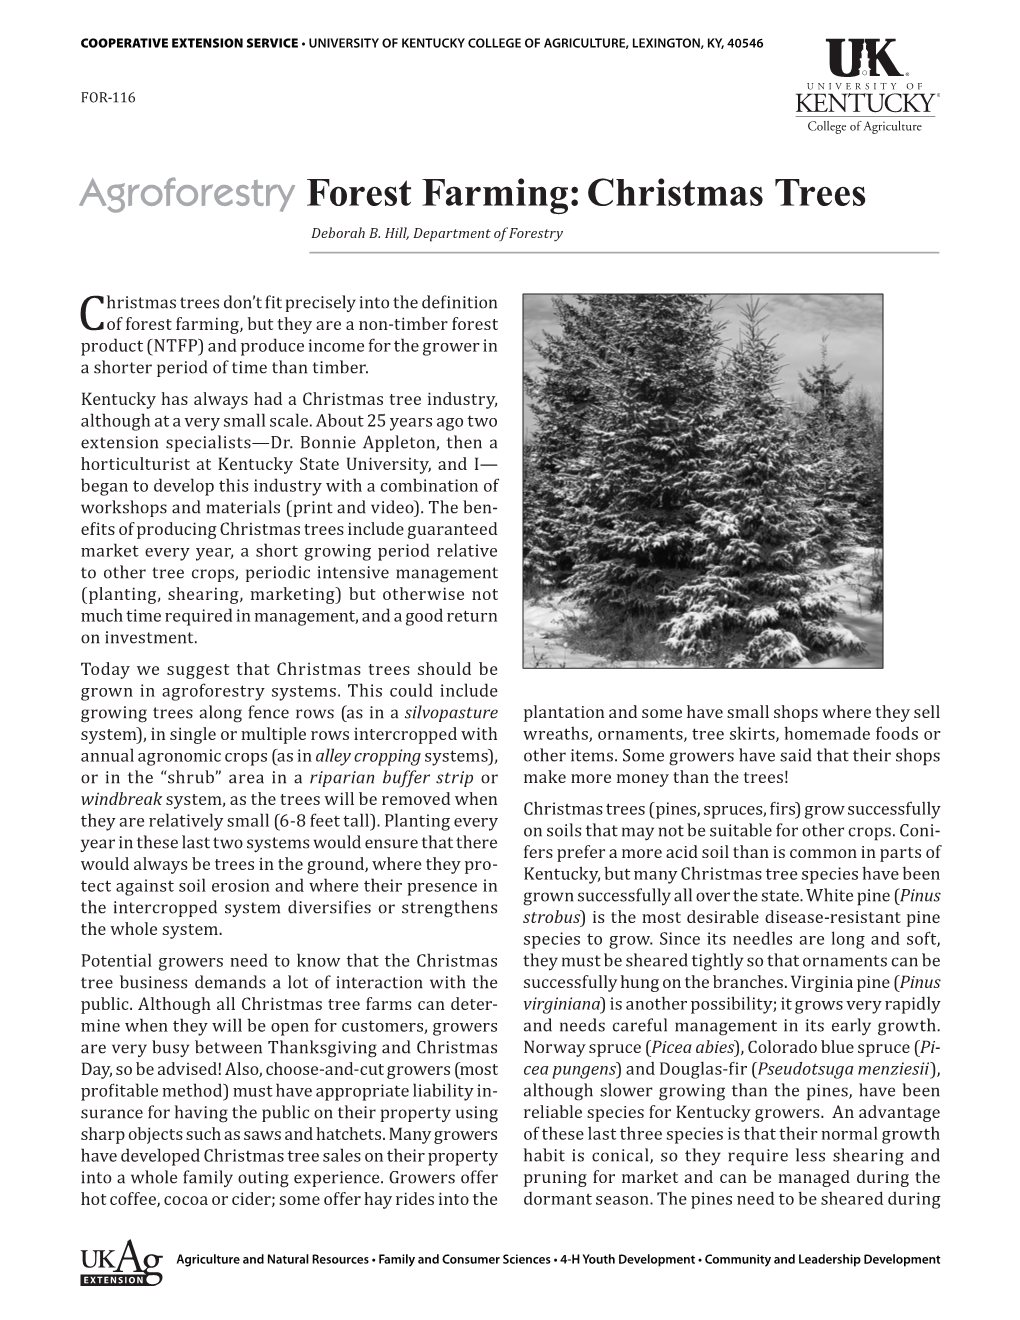 FOR-116: Forest Farming: Christmas Trees